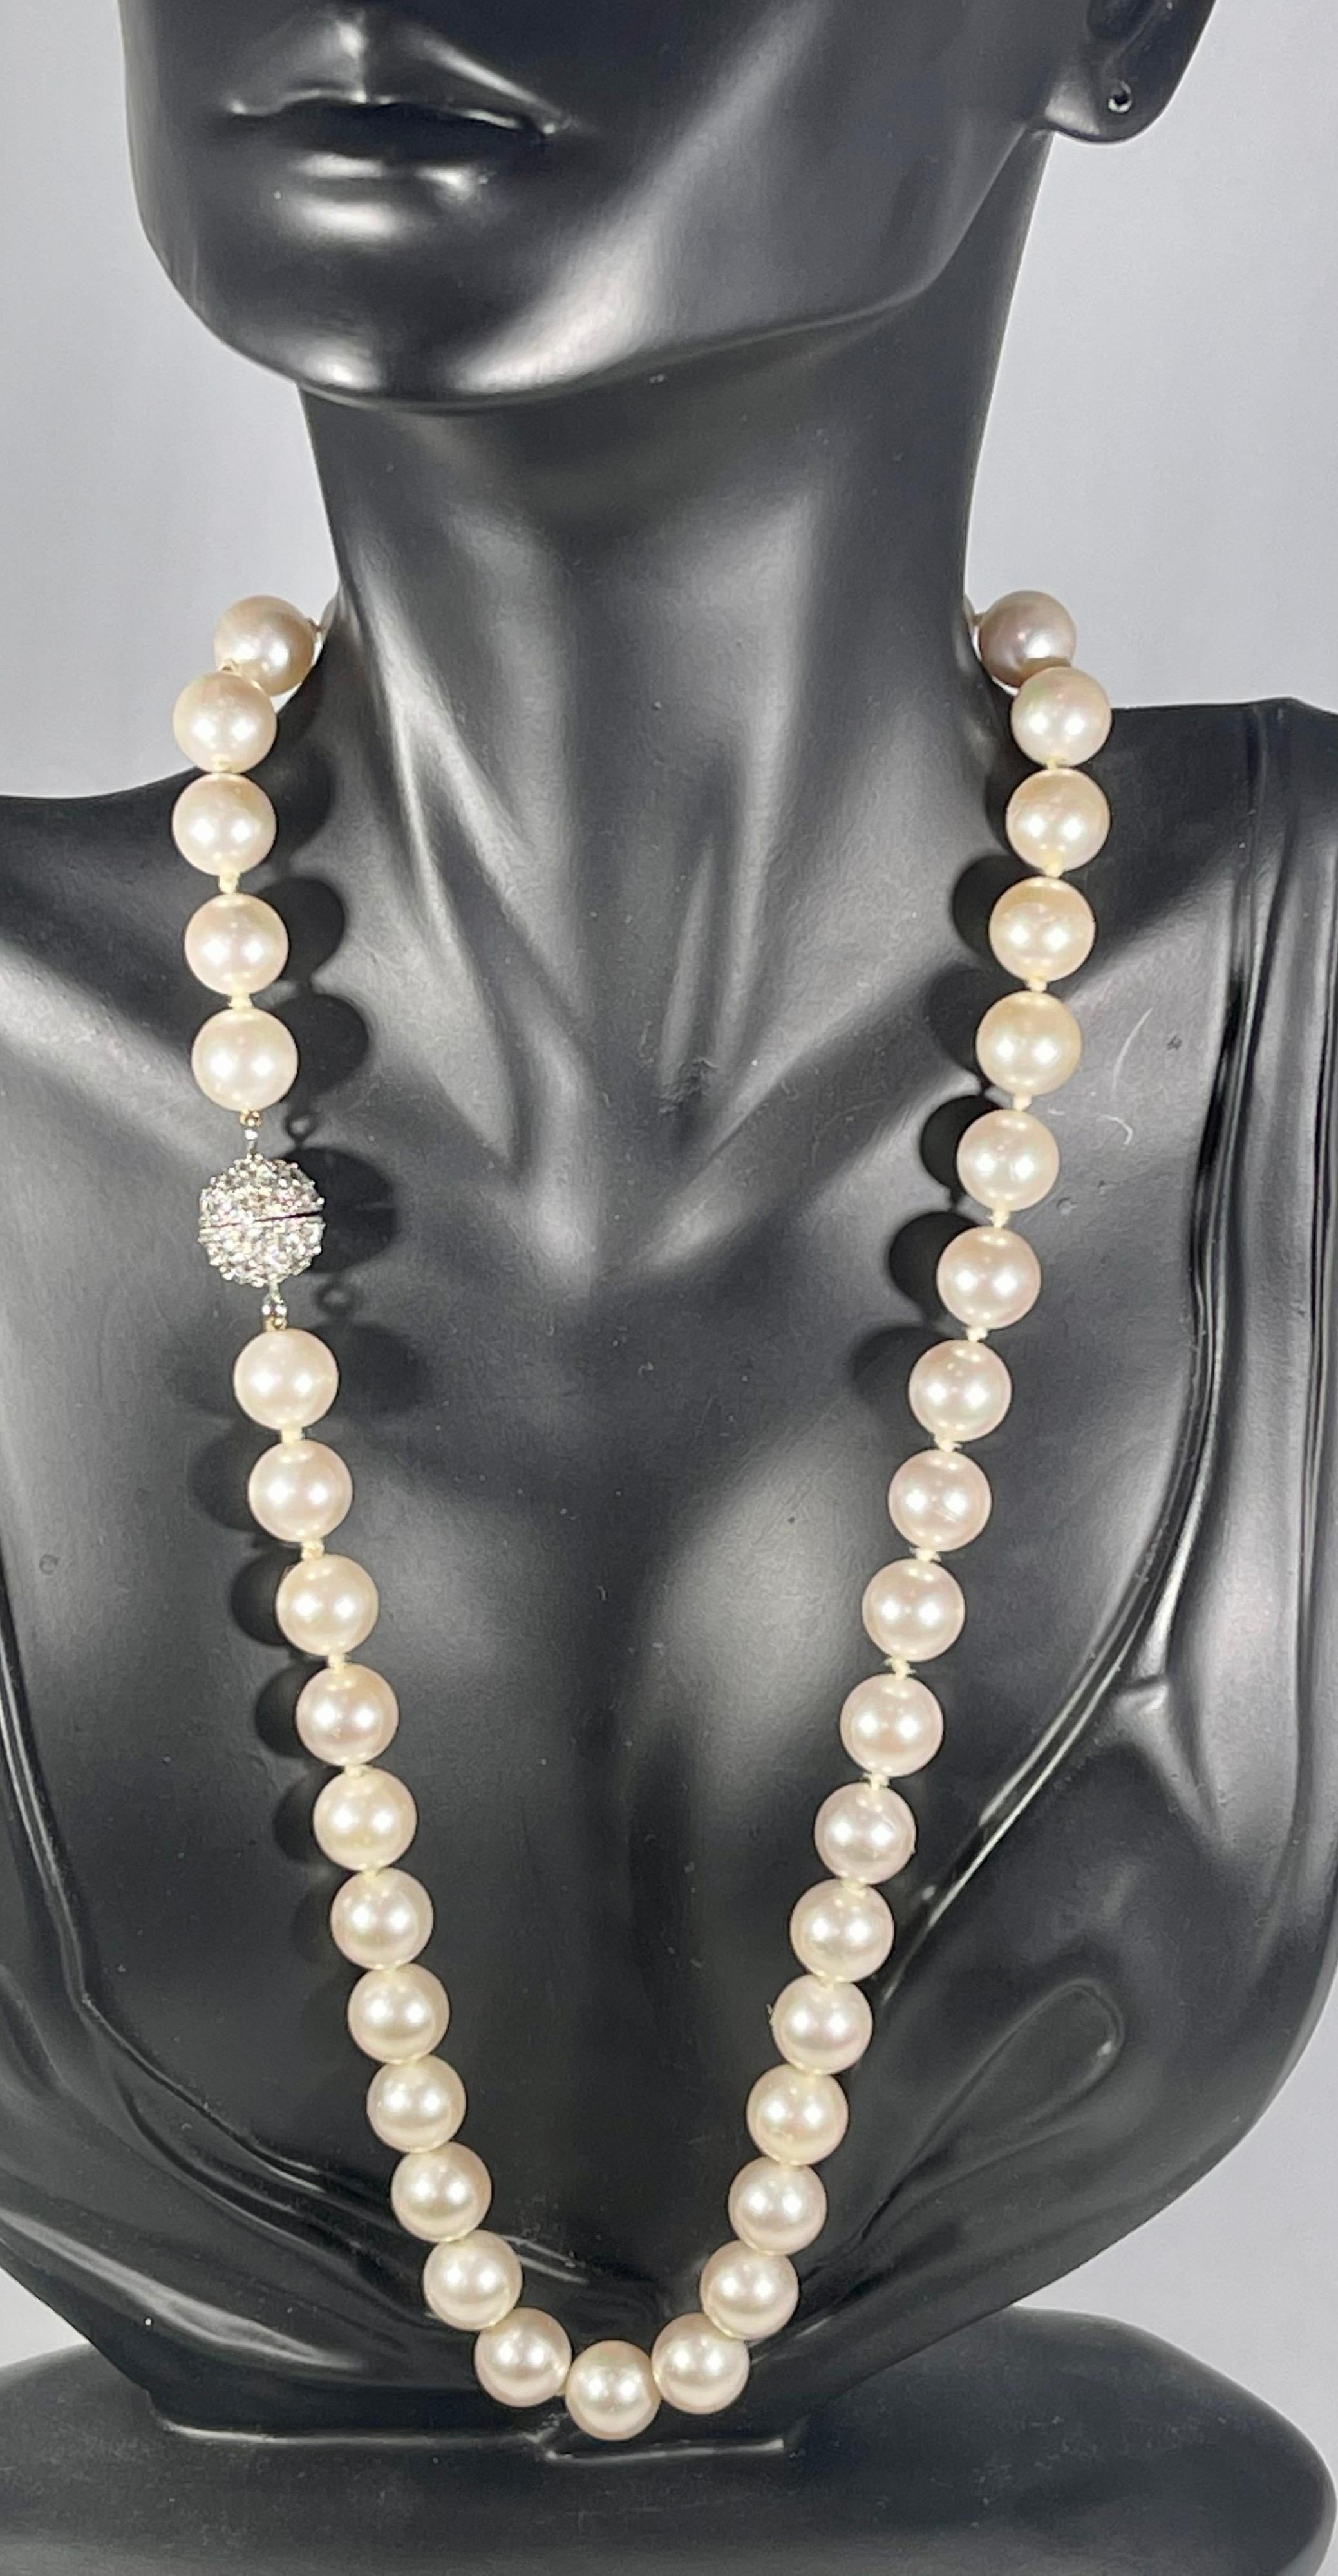 41 Round Akoya Pearls Strand Necklace Set in Metal Ball Clasp For Sale 5